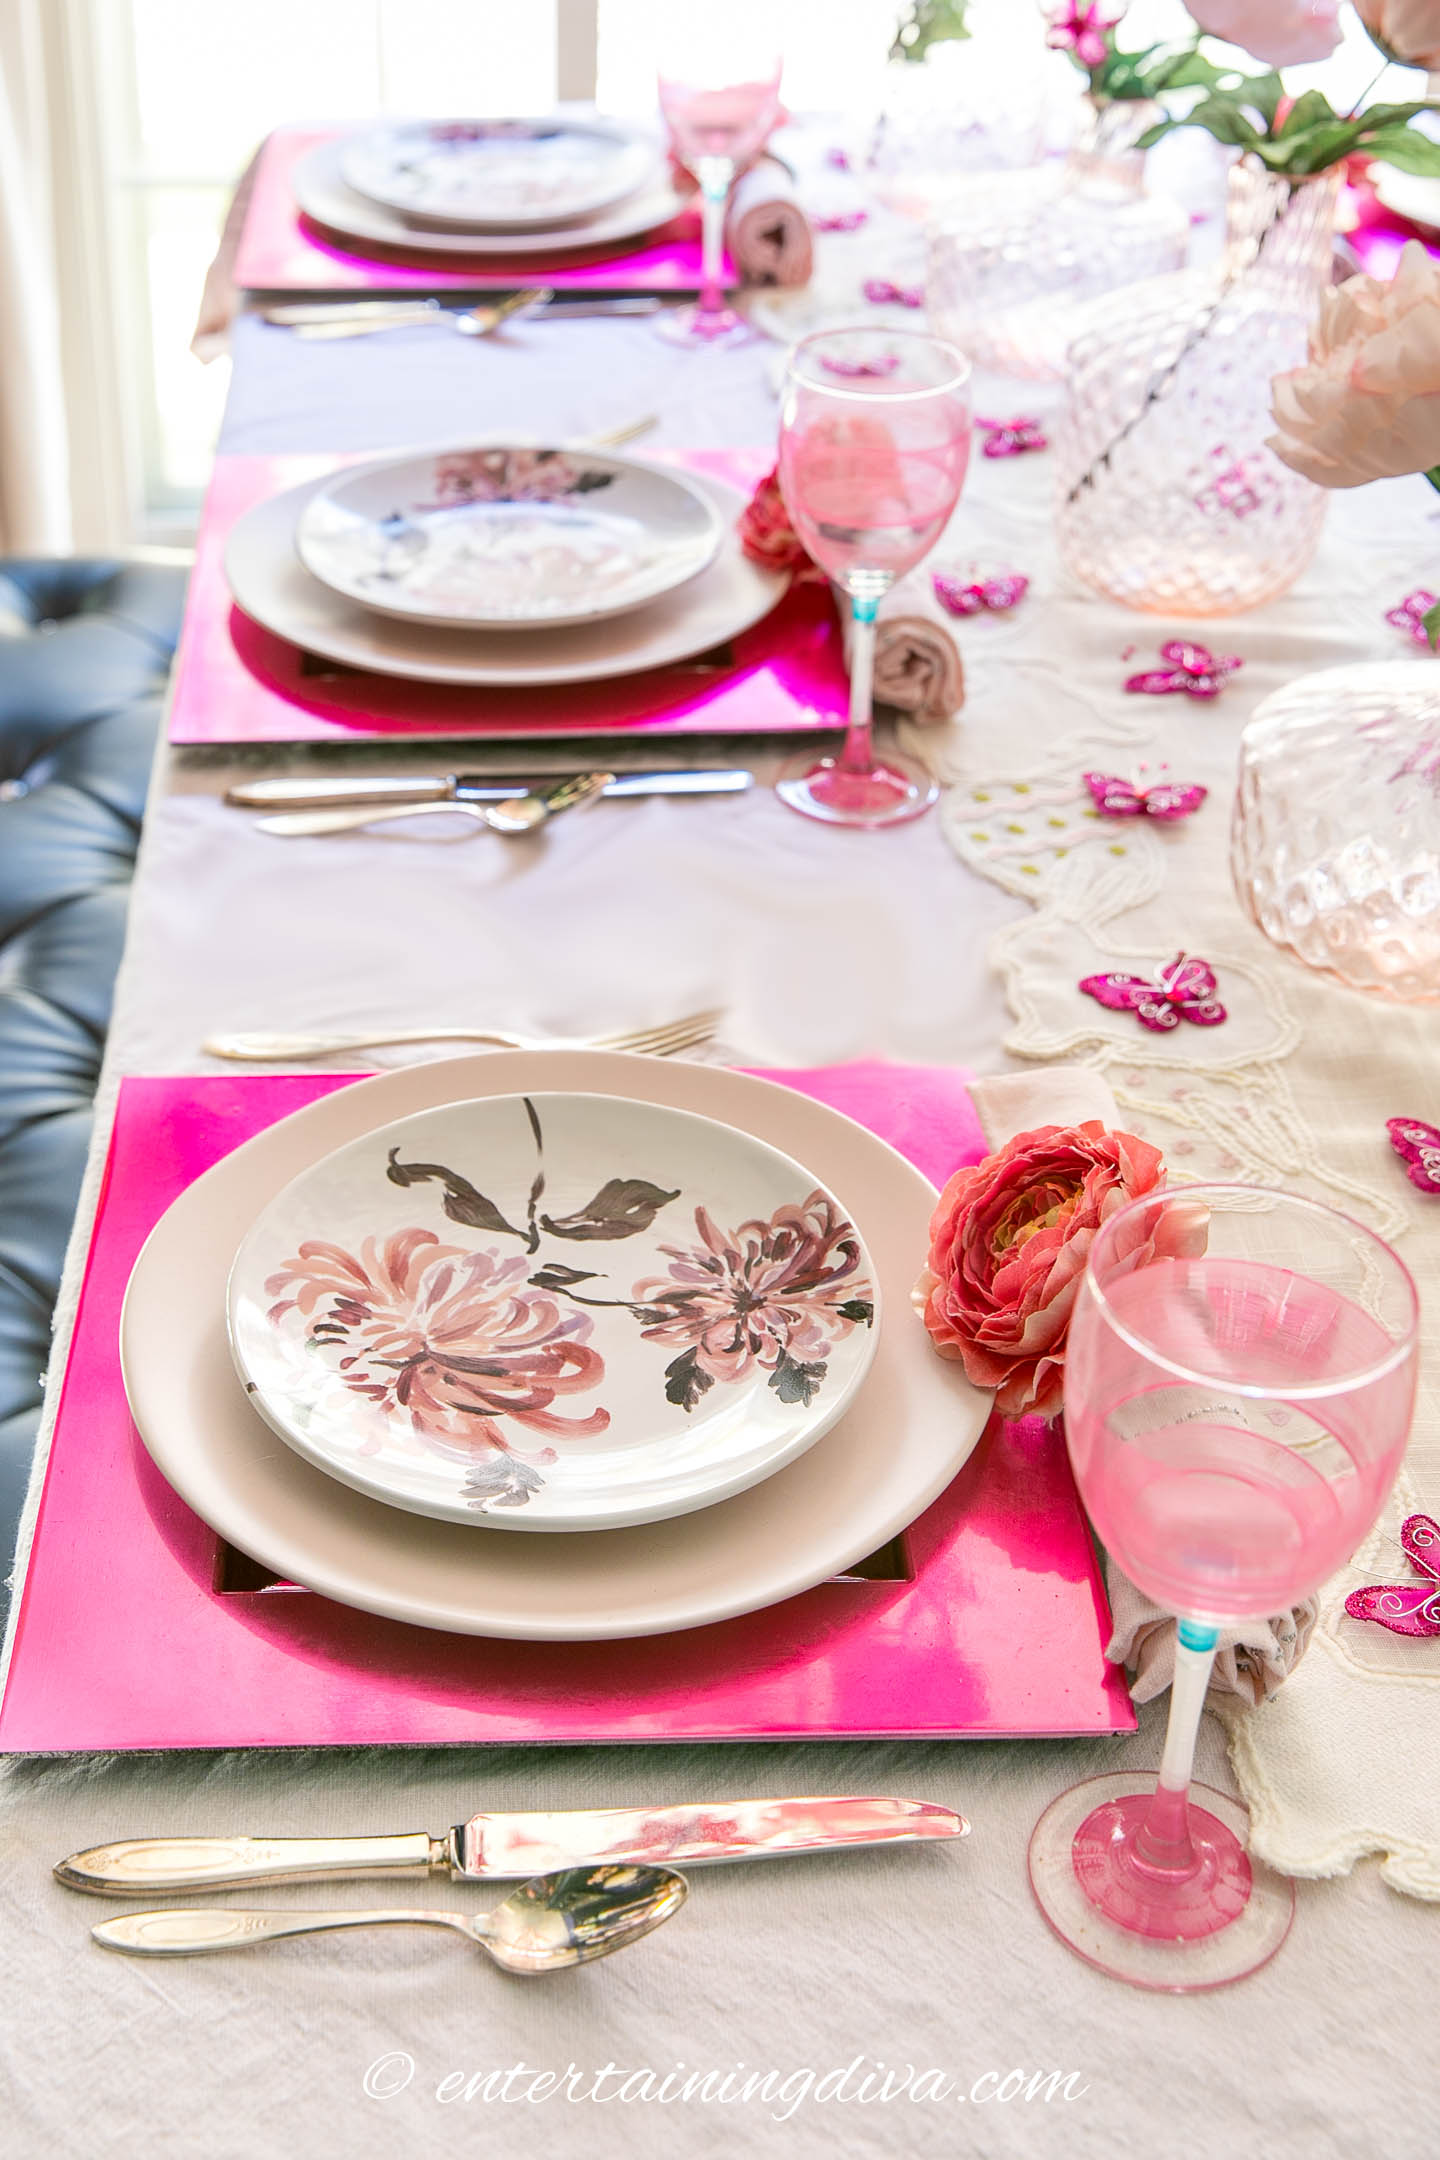 Lengthwise view of pink place setting with flowers and butterflies